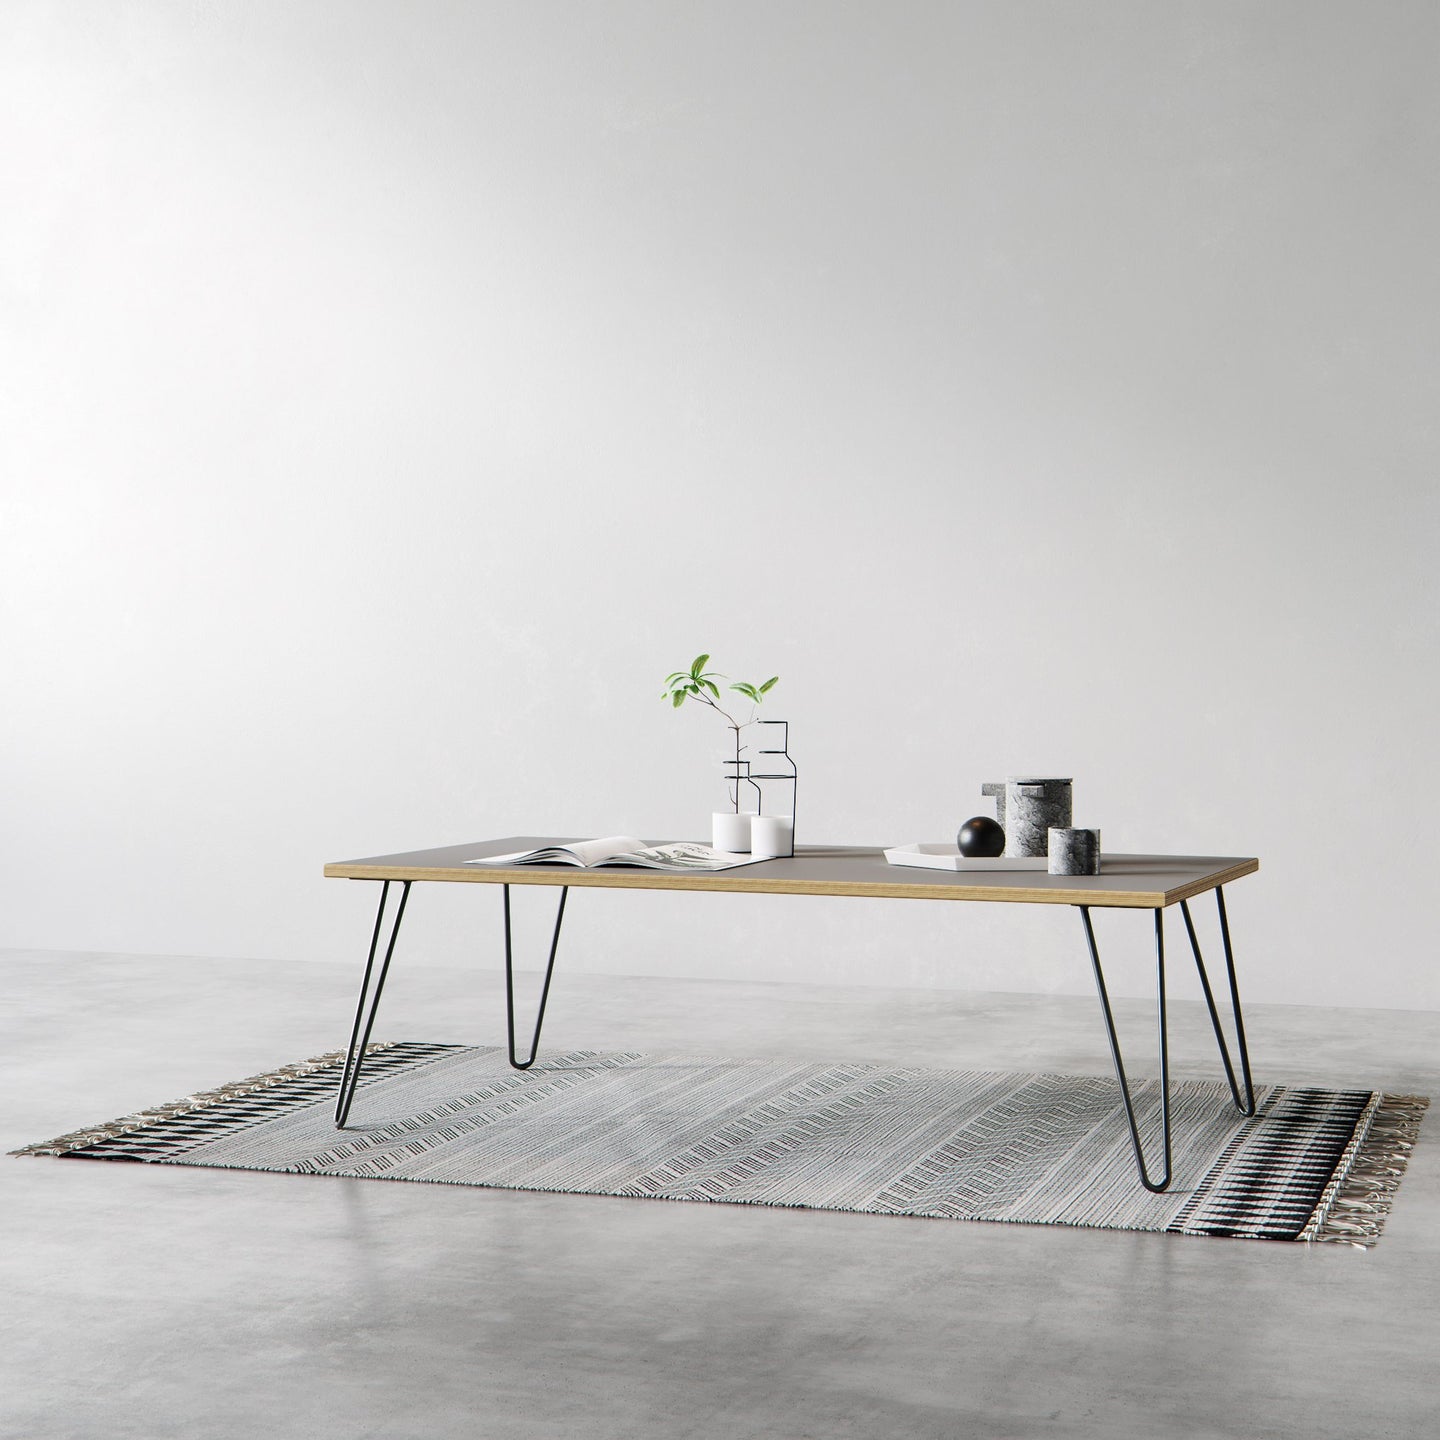 Scandinavian look grey formica coated birch coffee table completed with hairpin legs